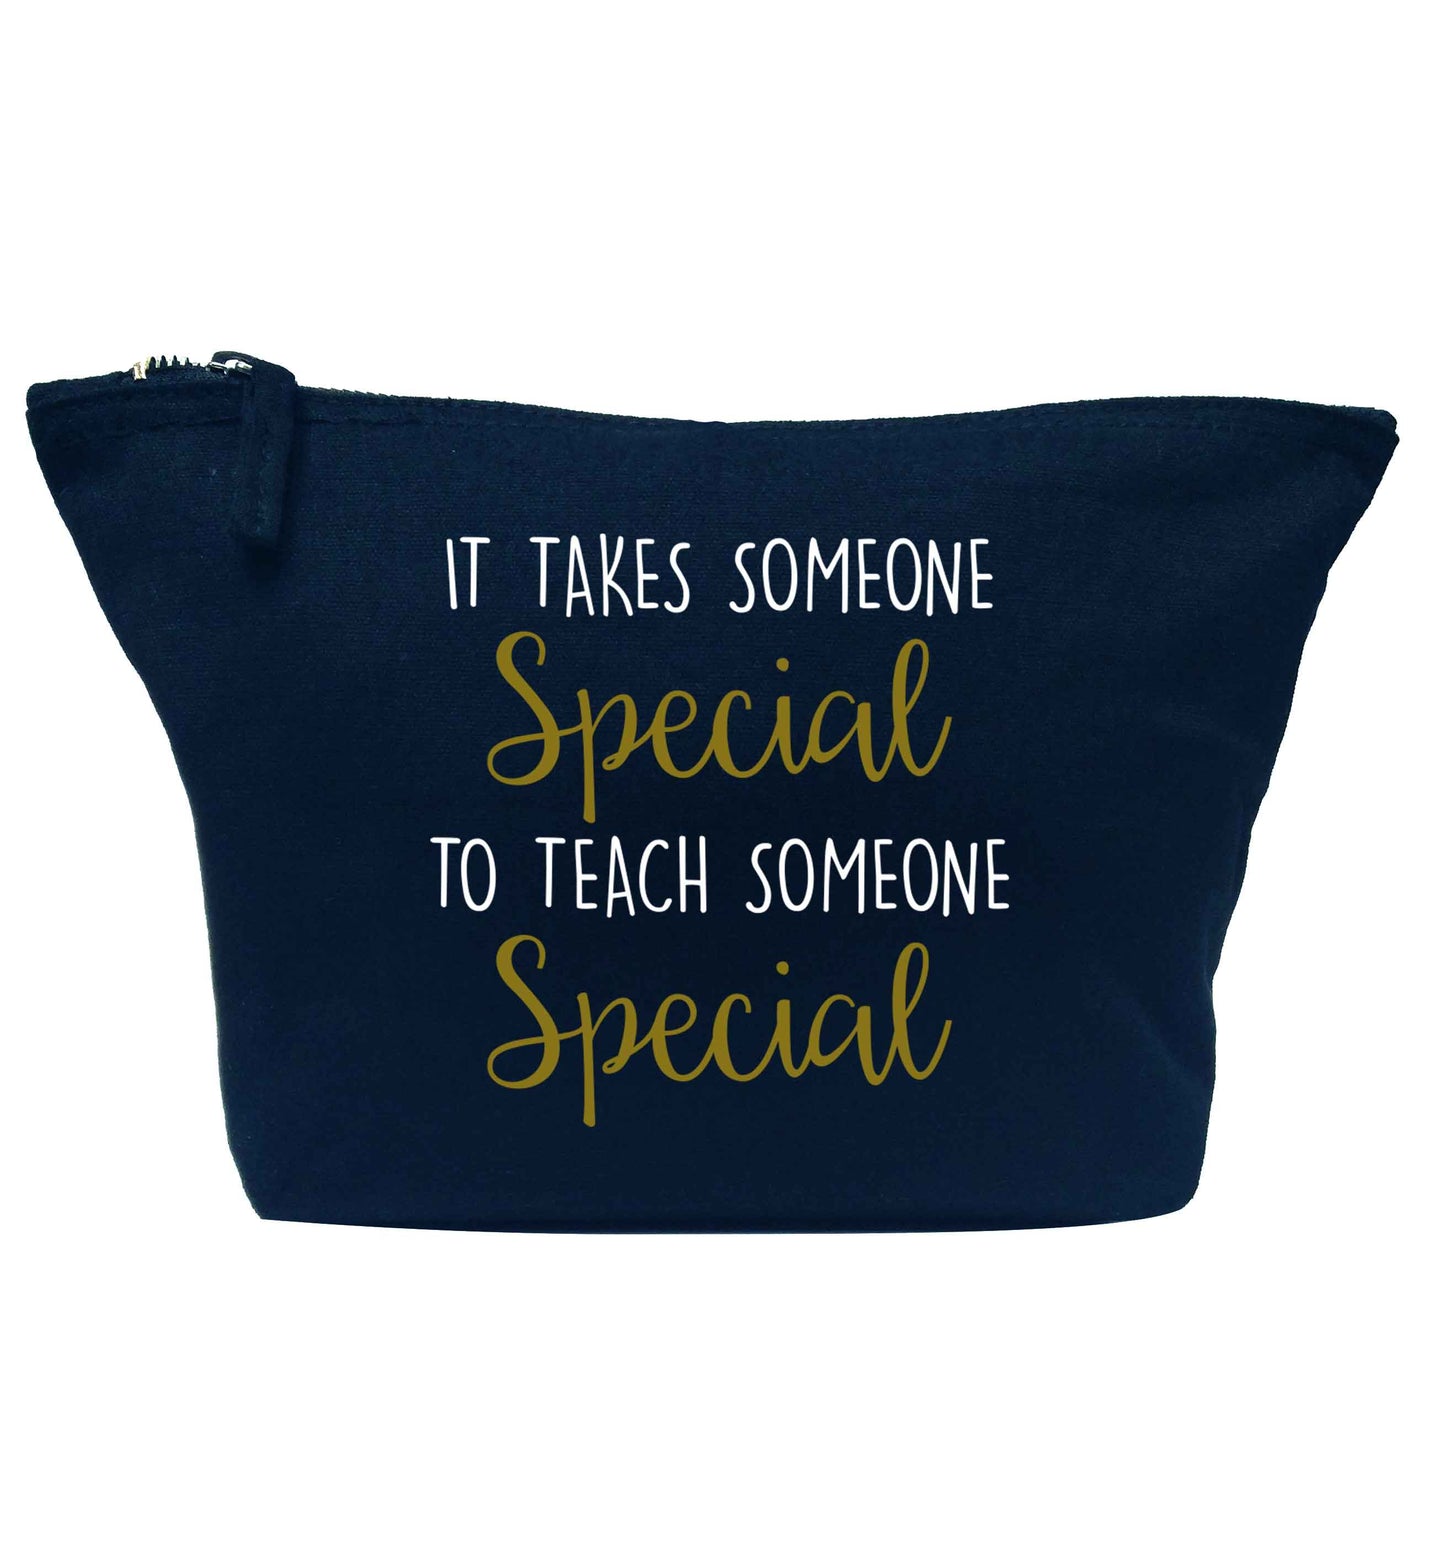 It takes someone special to teach someone special navy makeup bag